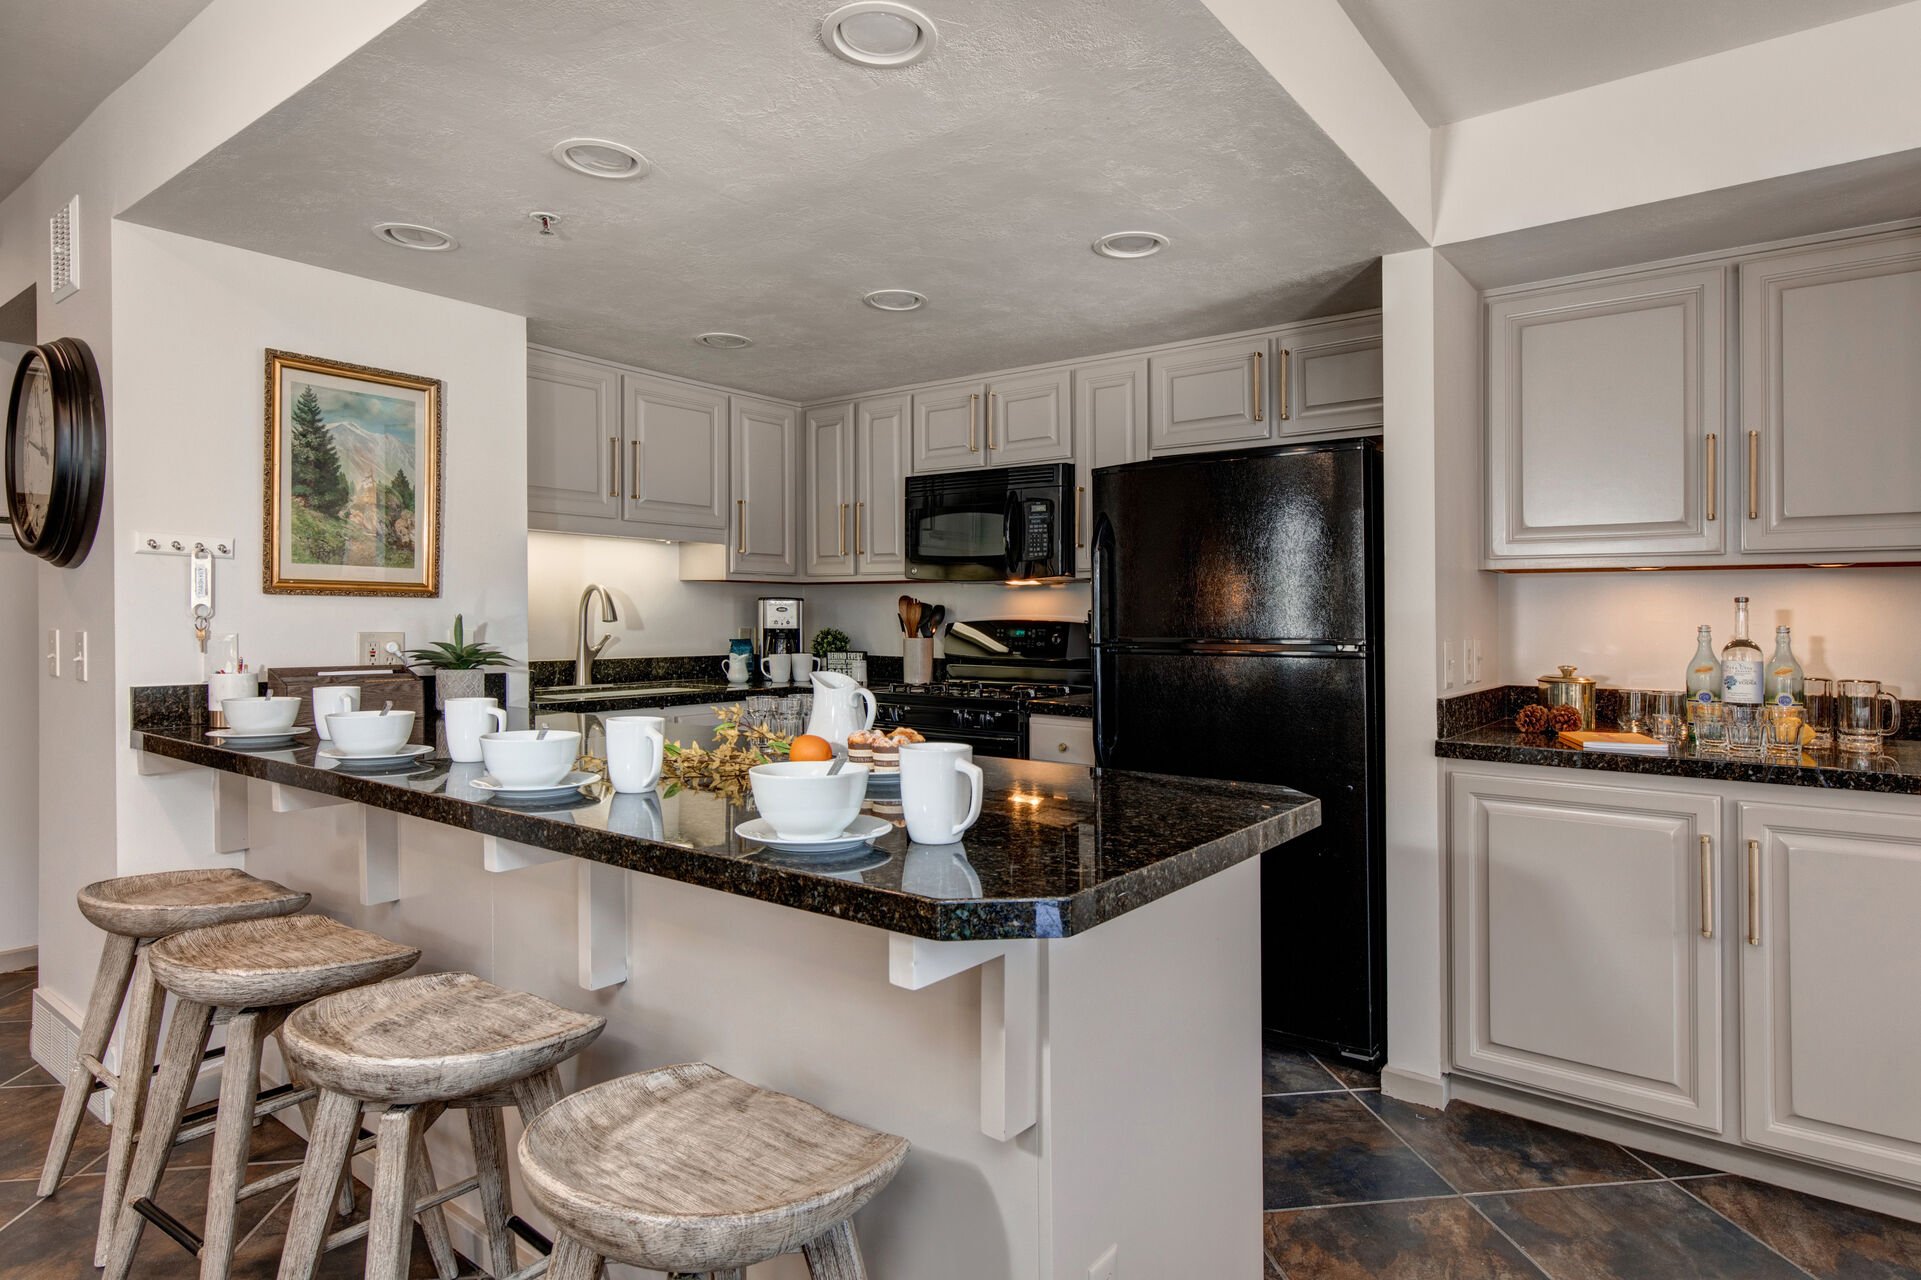 Fully Equipped Kitchen with bar seating for four, beautiful stone countertops, and wet bar